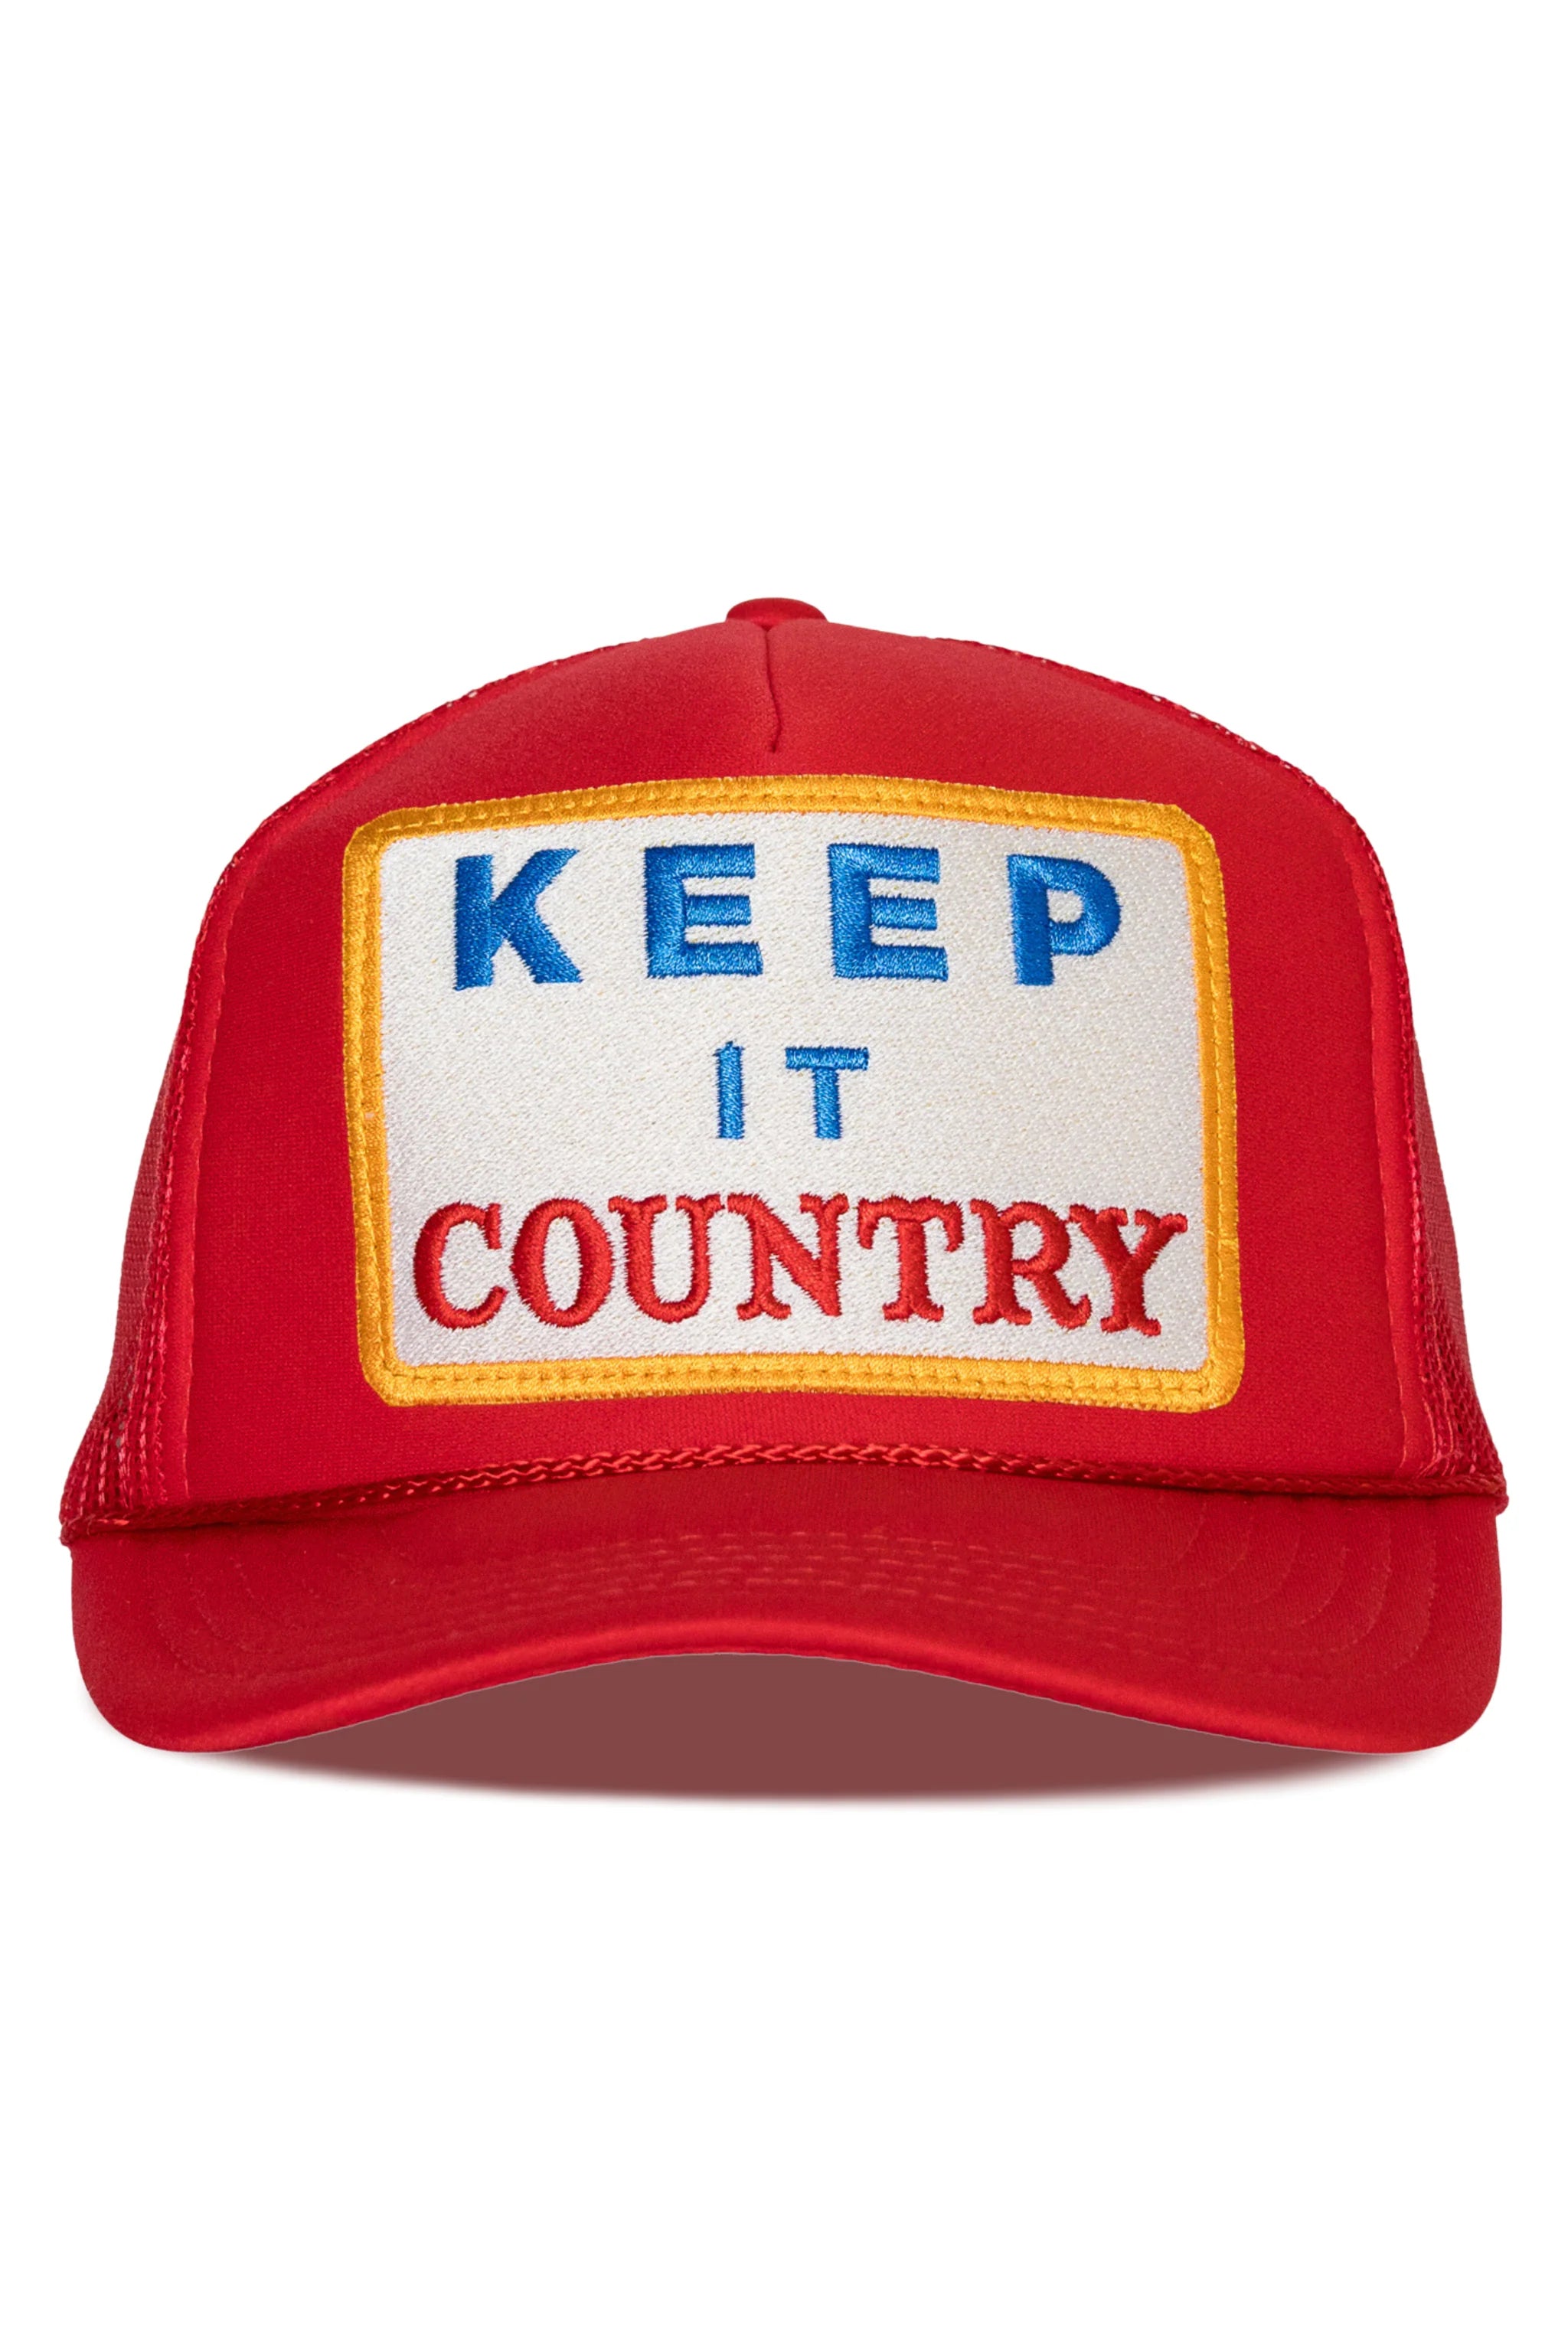 Keep It Country Trucker Hat